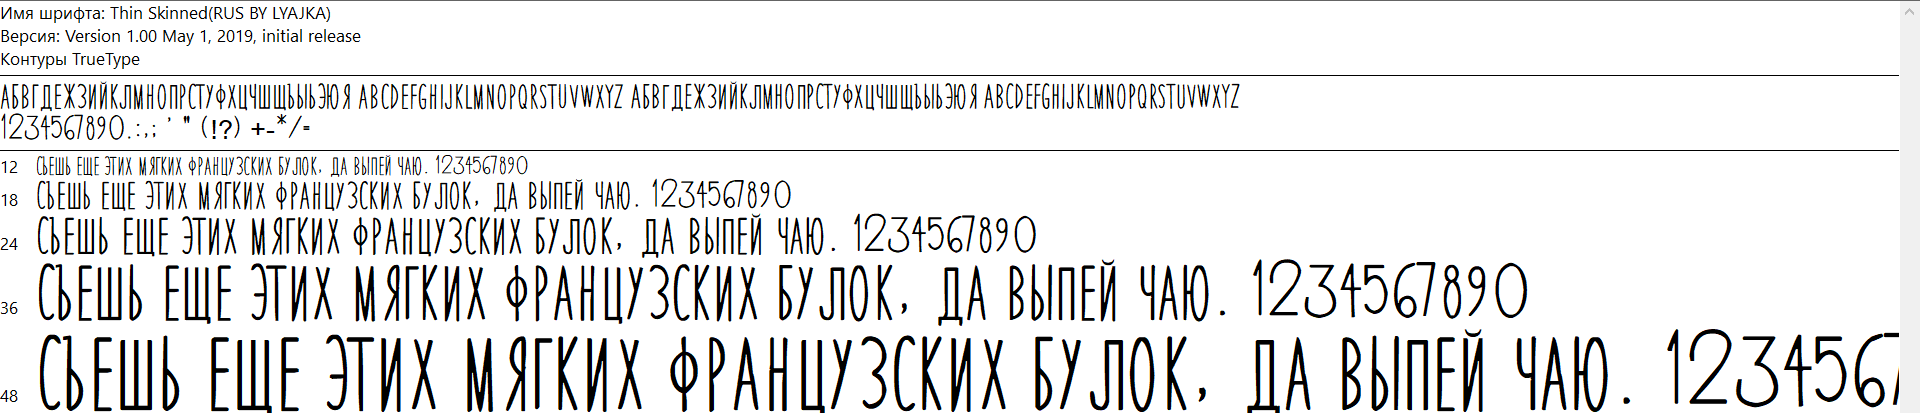 C:\Users\User\Pictures\Screenshots\Снимок экрана (1).png